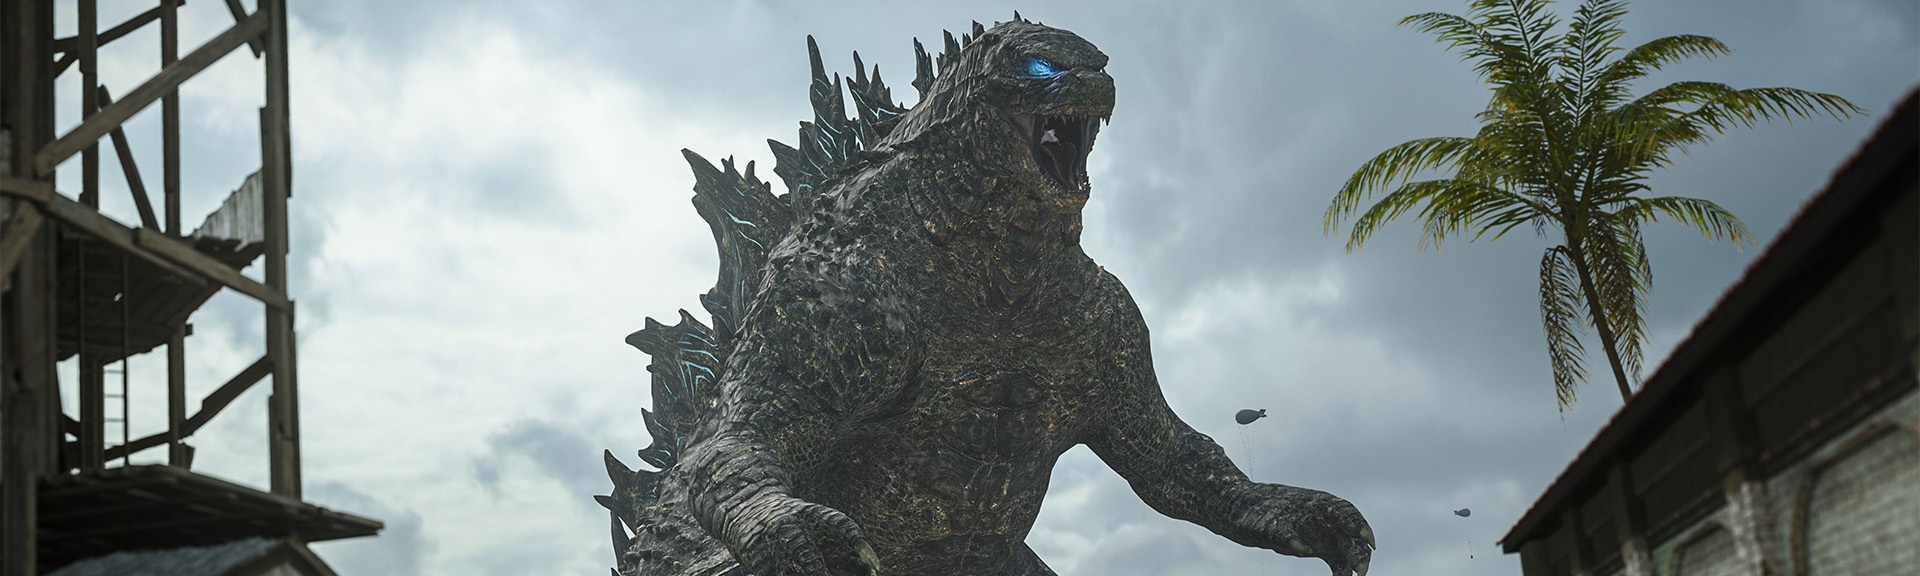 The one and only Godzilla.